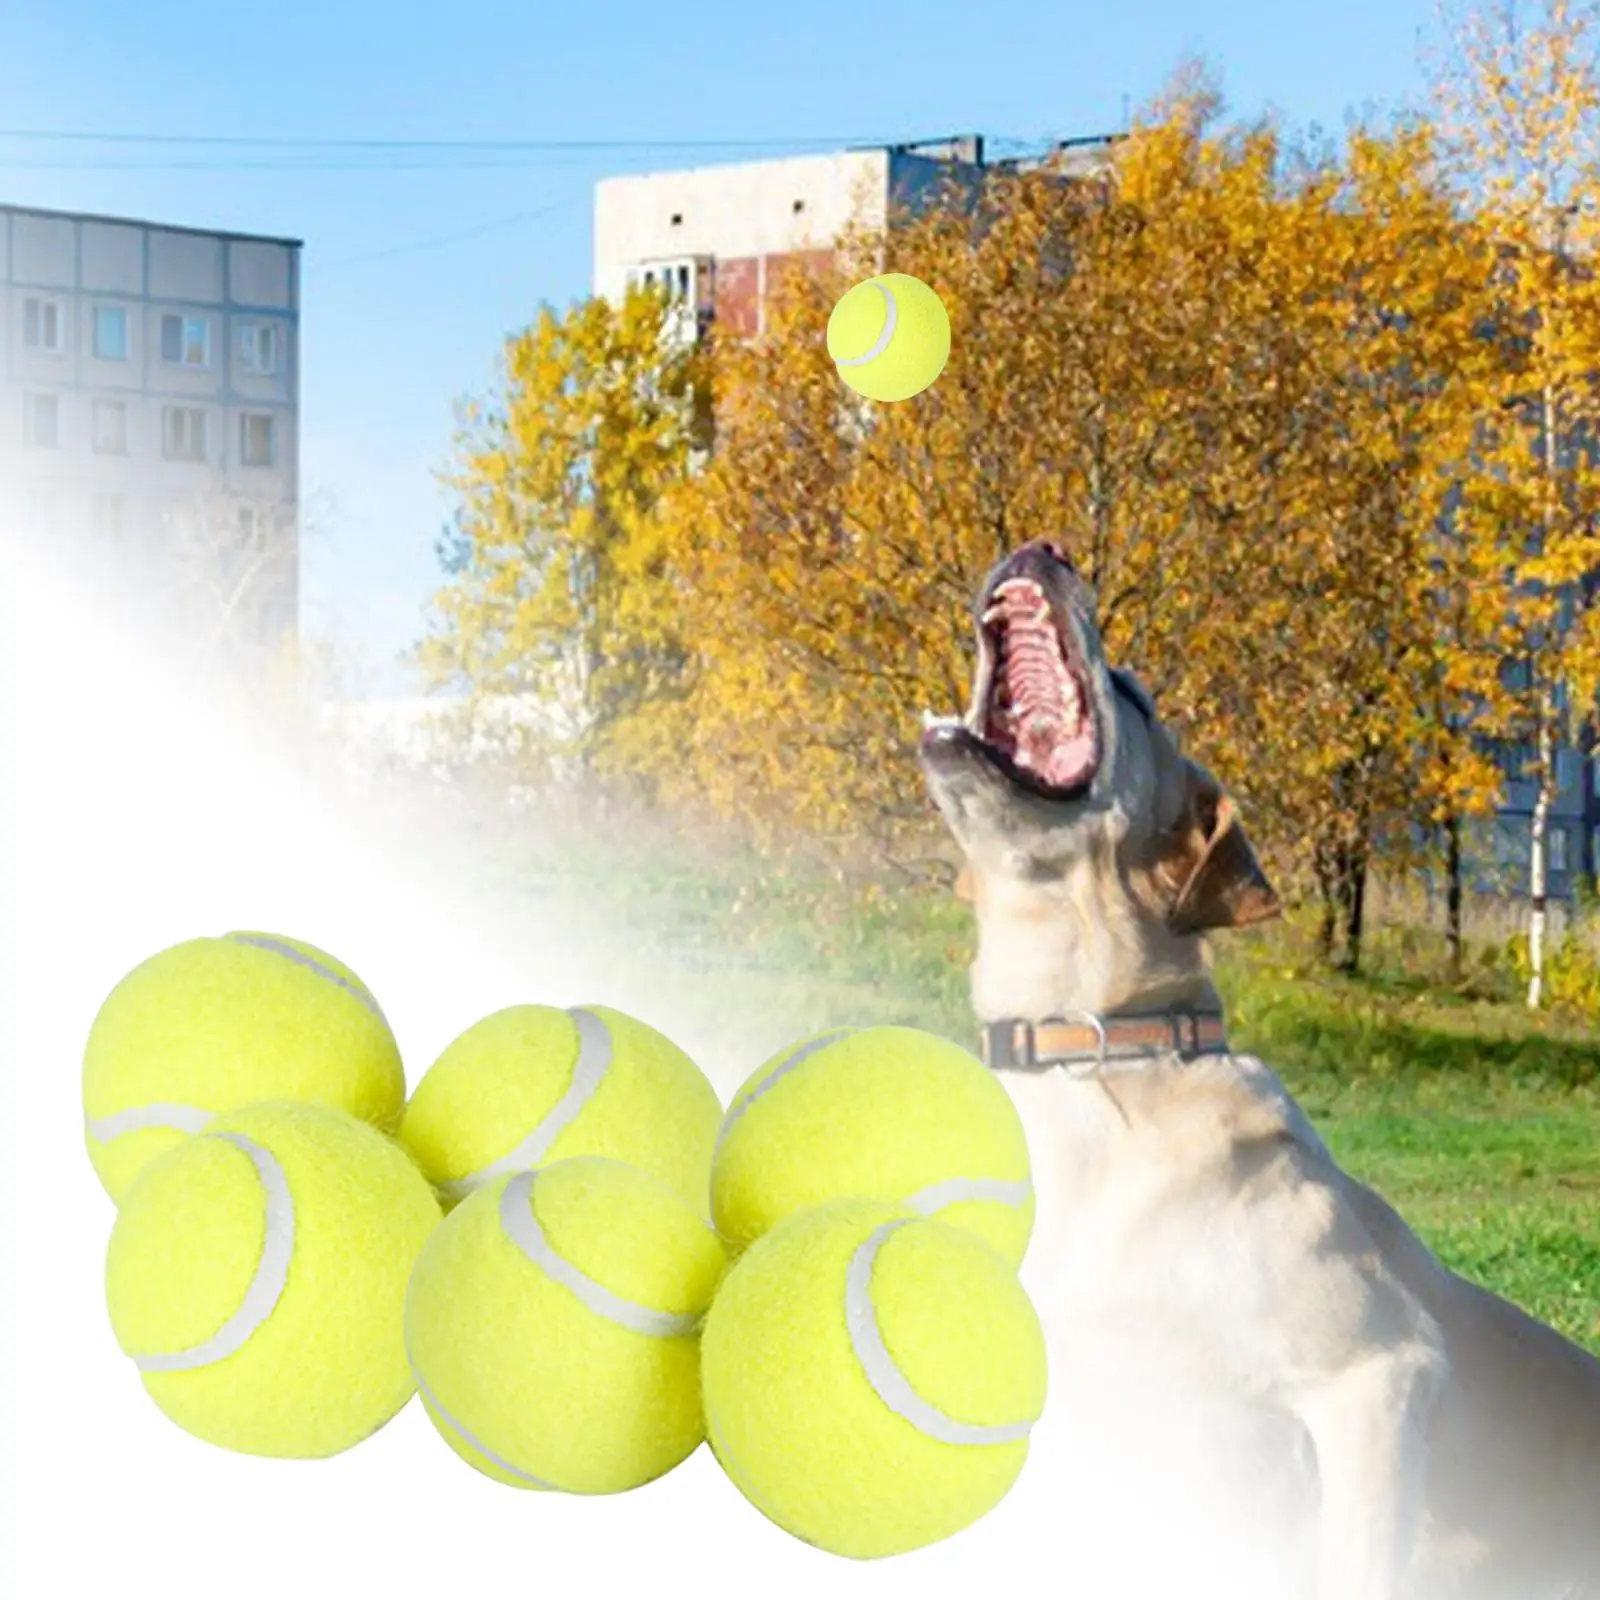 s s,  Balls s Durable to Exercise and Playing,  Bright Colors Rubber Dog Balls   Ball Launcher